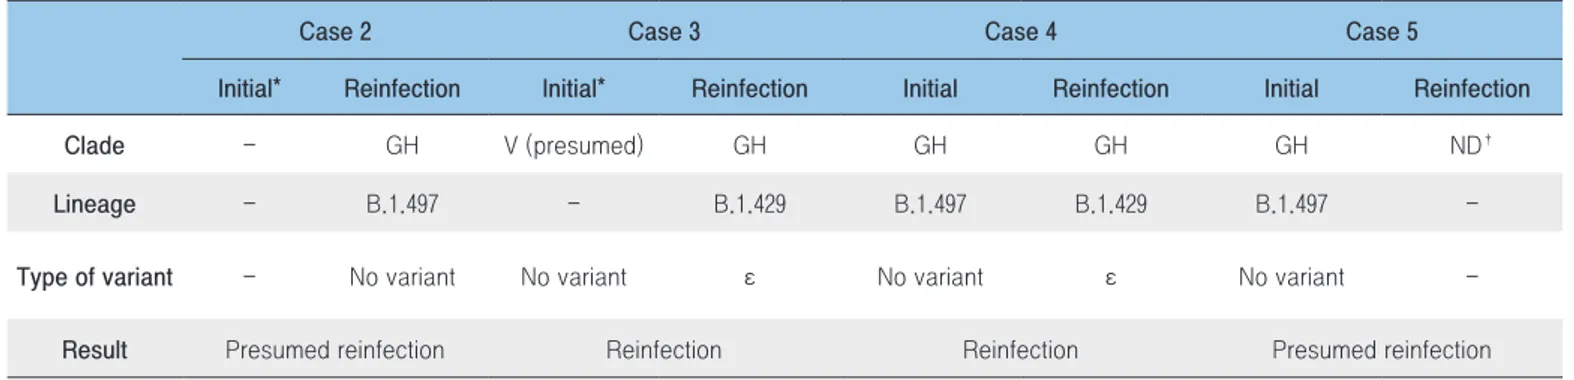 Table 2. Epidemiological and biological results of presumed reinfection cases